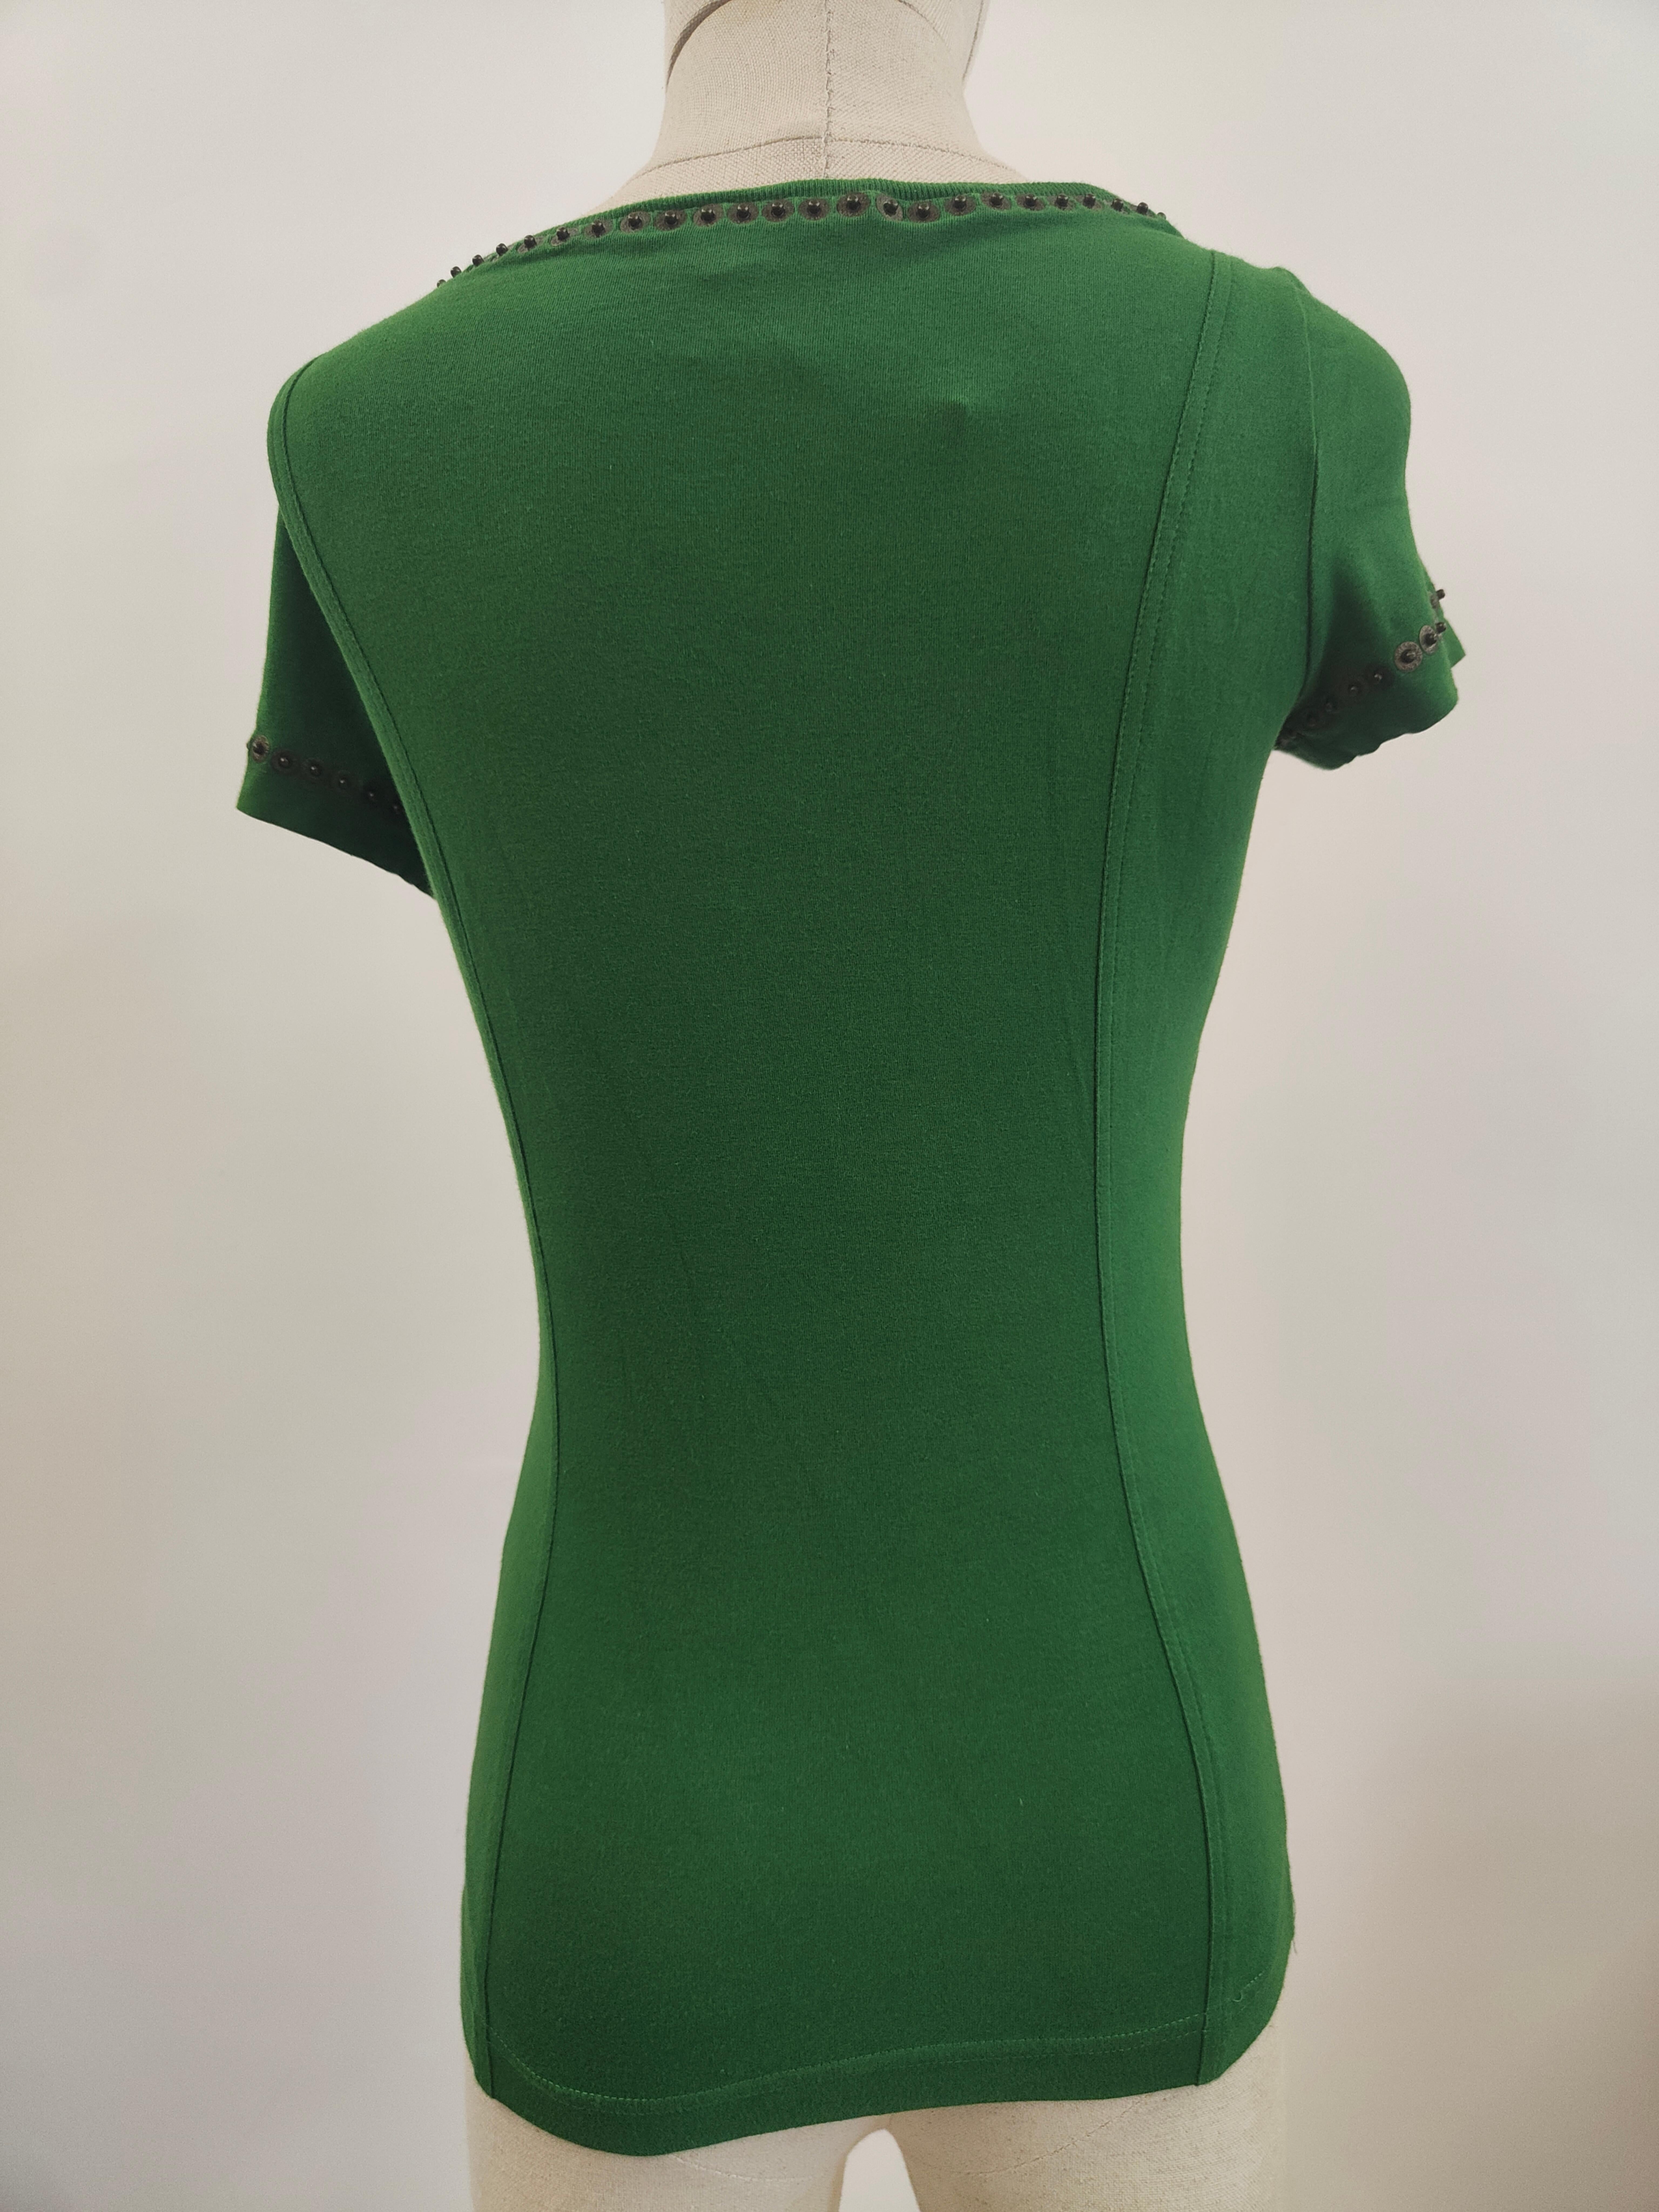 Moschino Cheap & Chic green with beads t-shirt  In Excellent Condition For Sale In Capri, IT